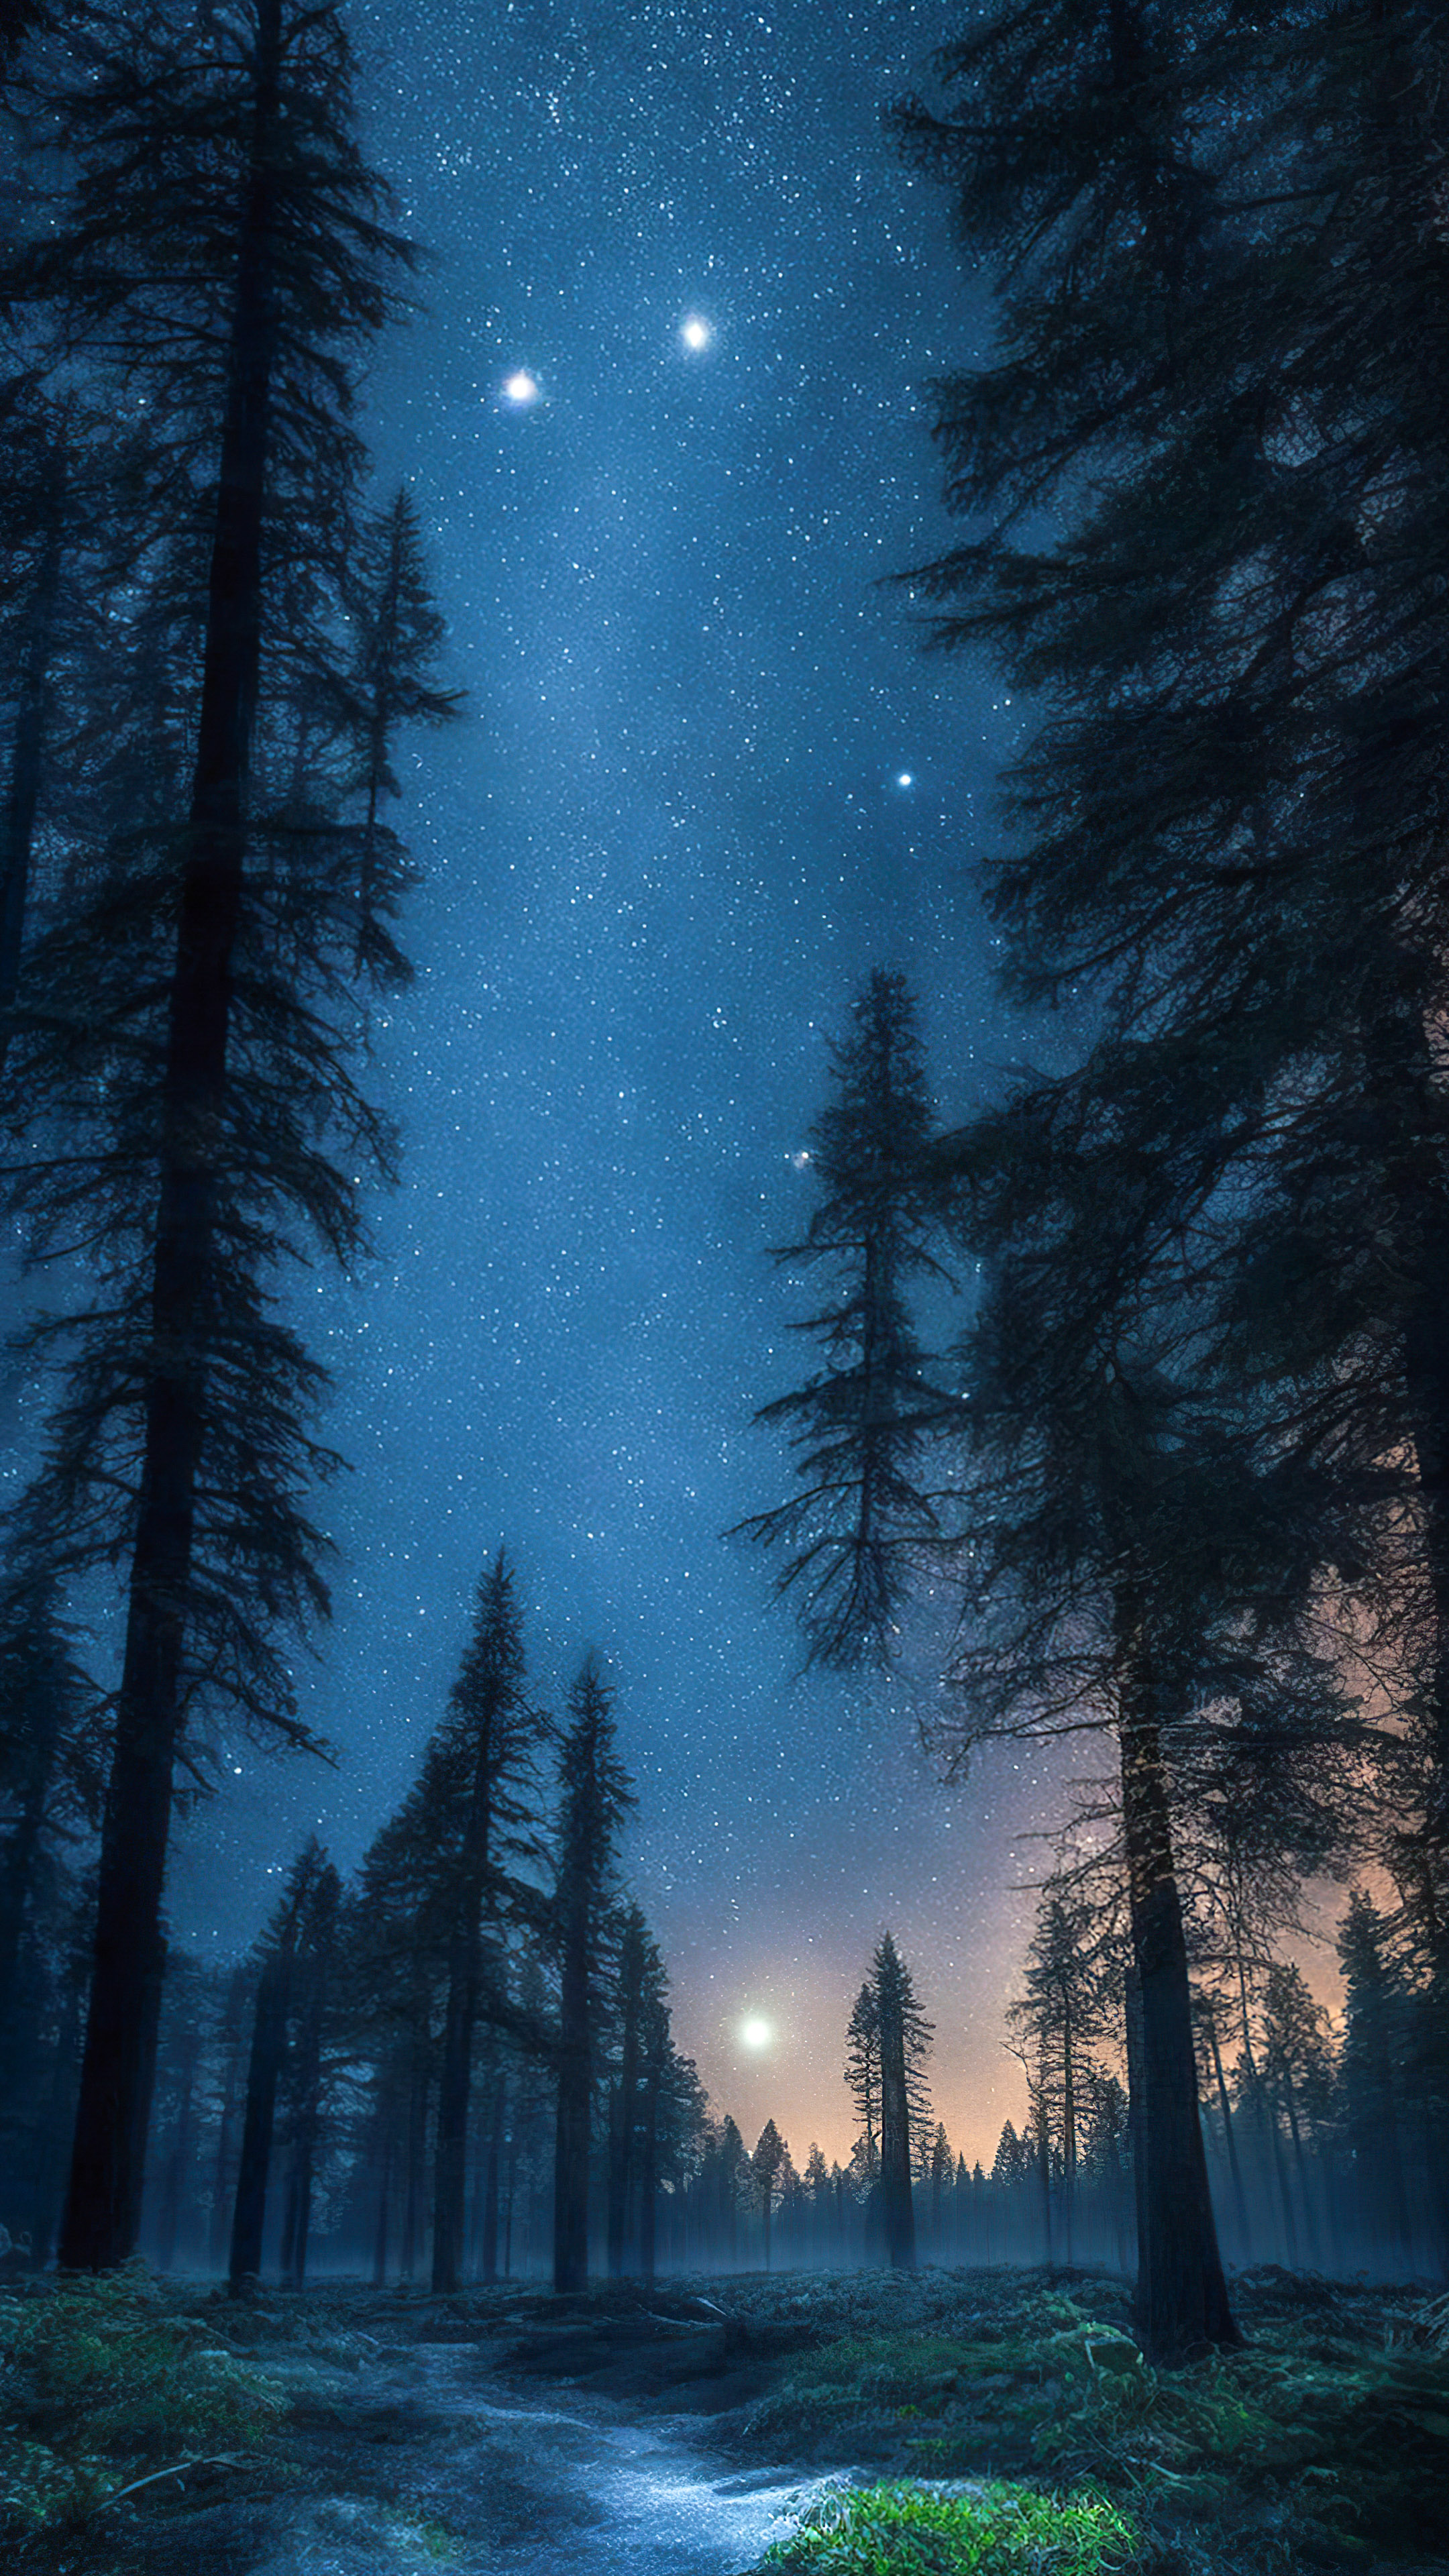 Experience the tranquility of our midnight sky wallpaper, depicting a tranquil forest at night, with tall, ancient trees under a starry sky and a soft, moonlit glow.